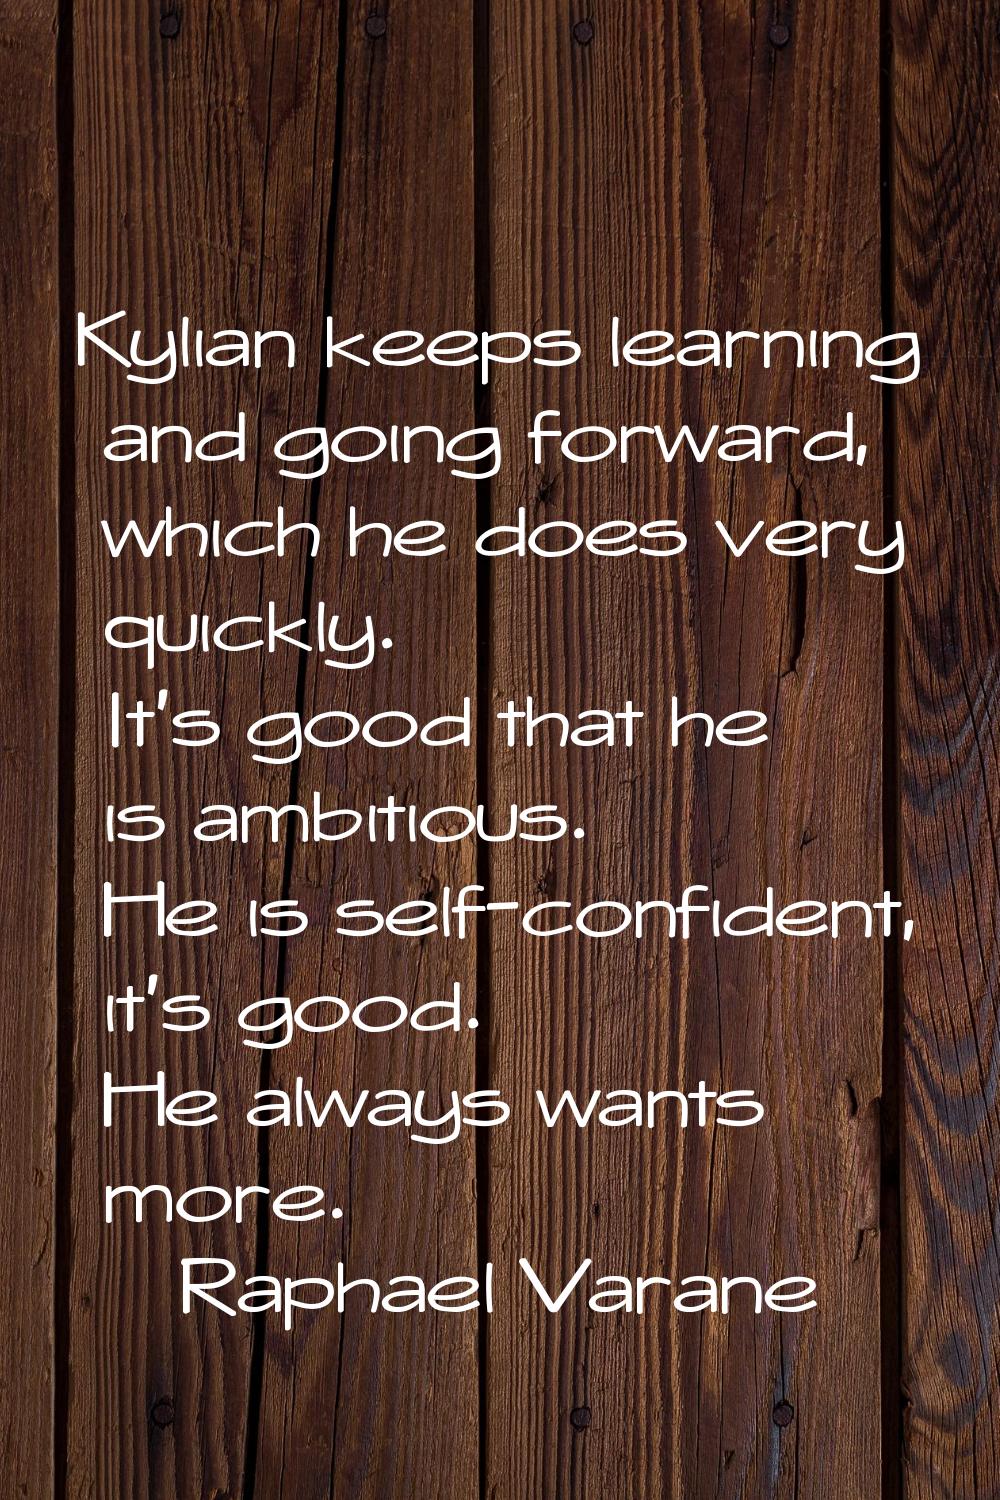 Kylian keeps learning and going forward, which he does very quickly. It's good that he is ambitious